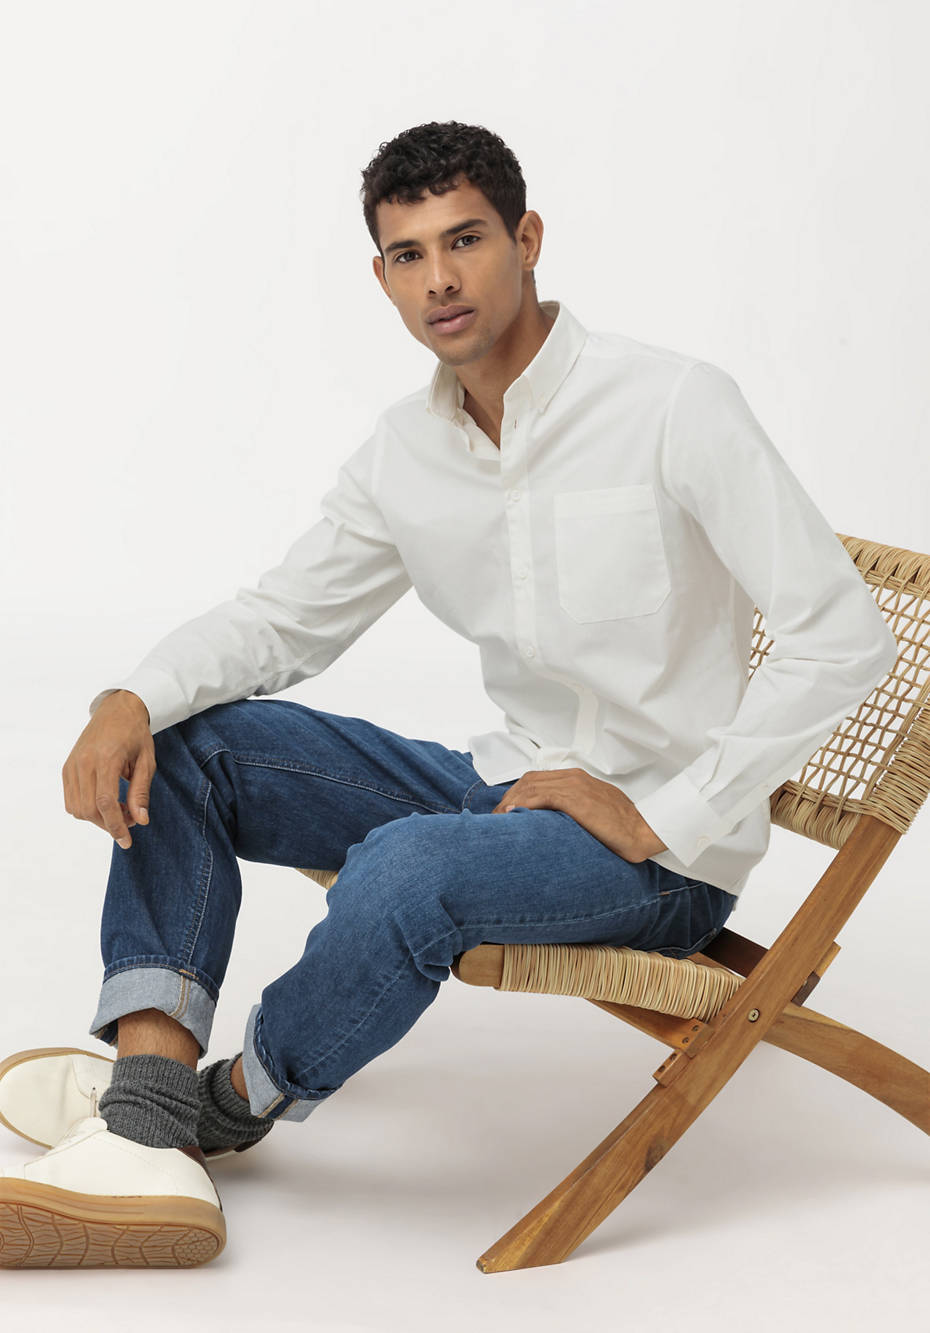 Oxford shirt modern fit made of pure organic cotton